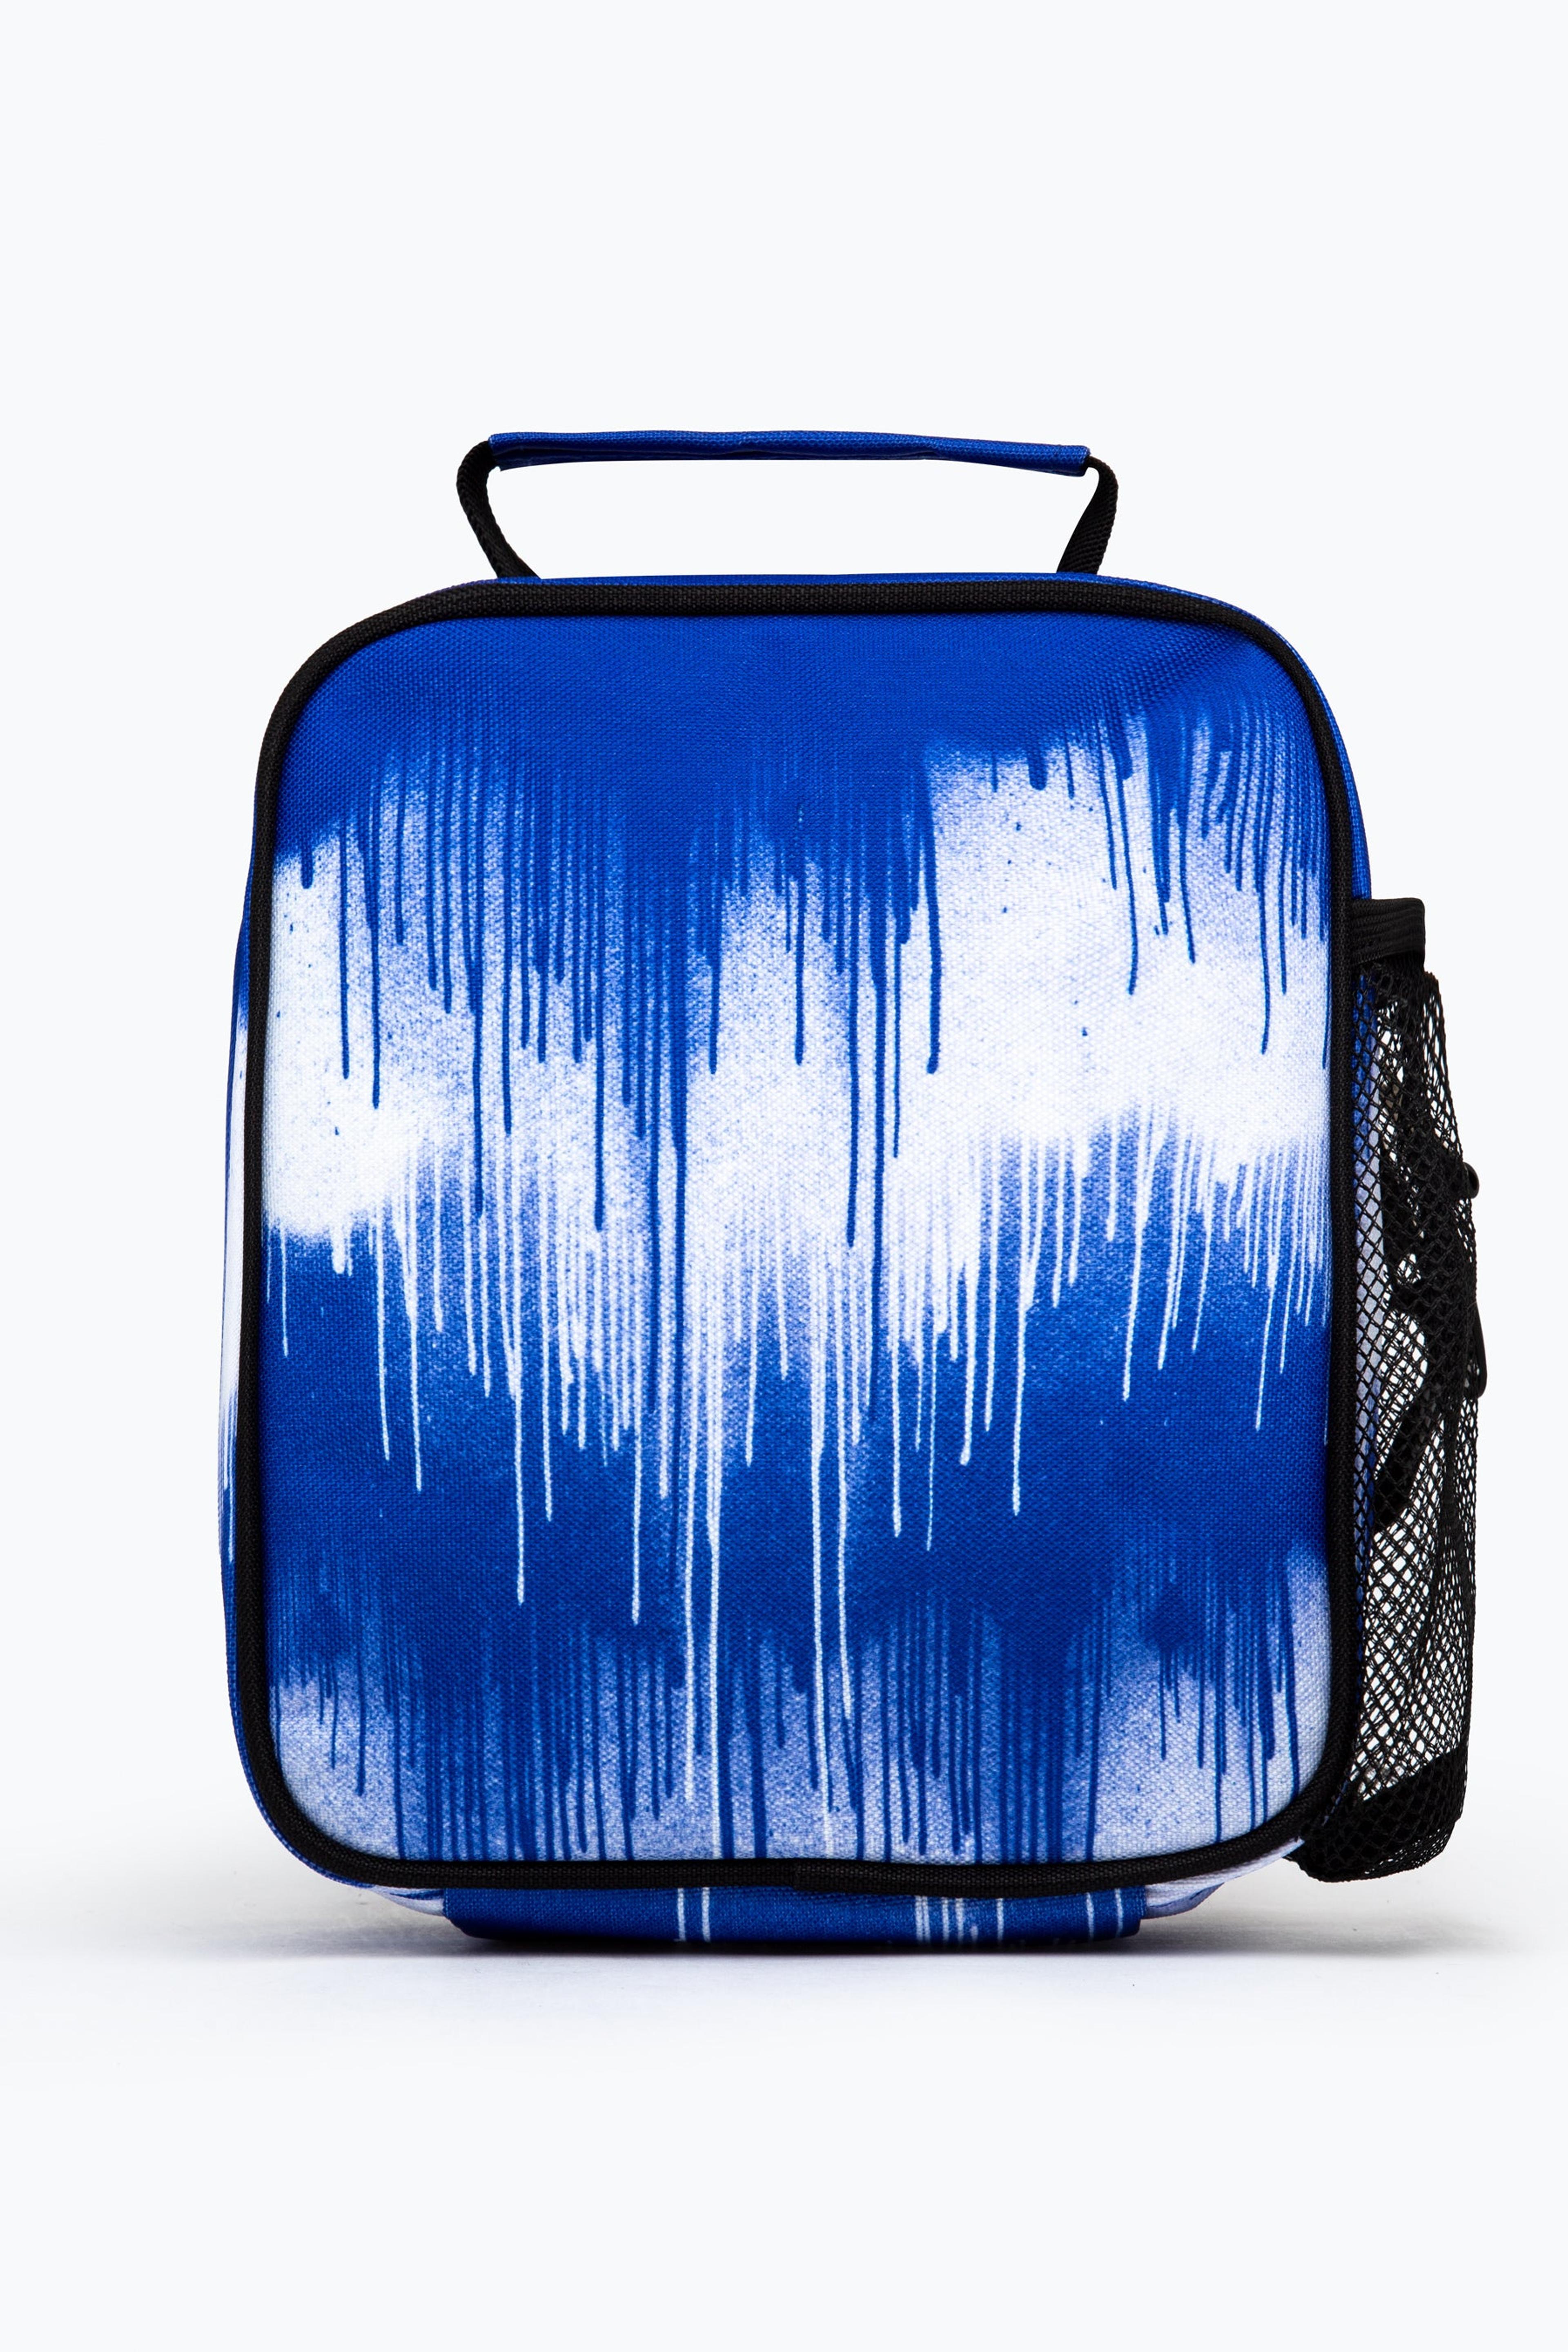 Alternate View 2 of HYPE ROYAL BLUE SINGLE DRIP LUNCHBOX